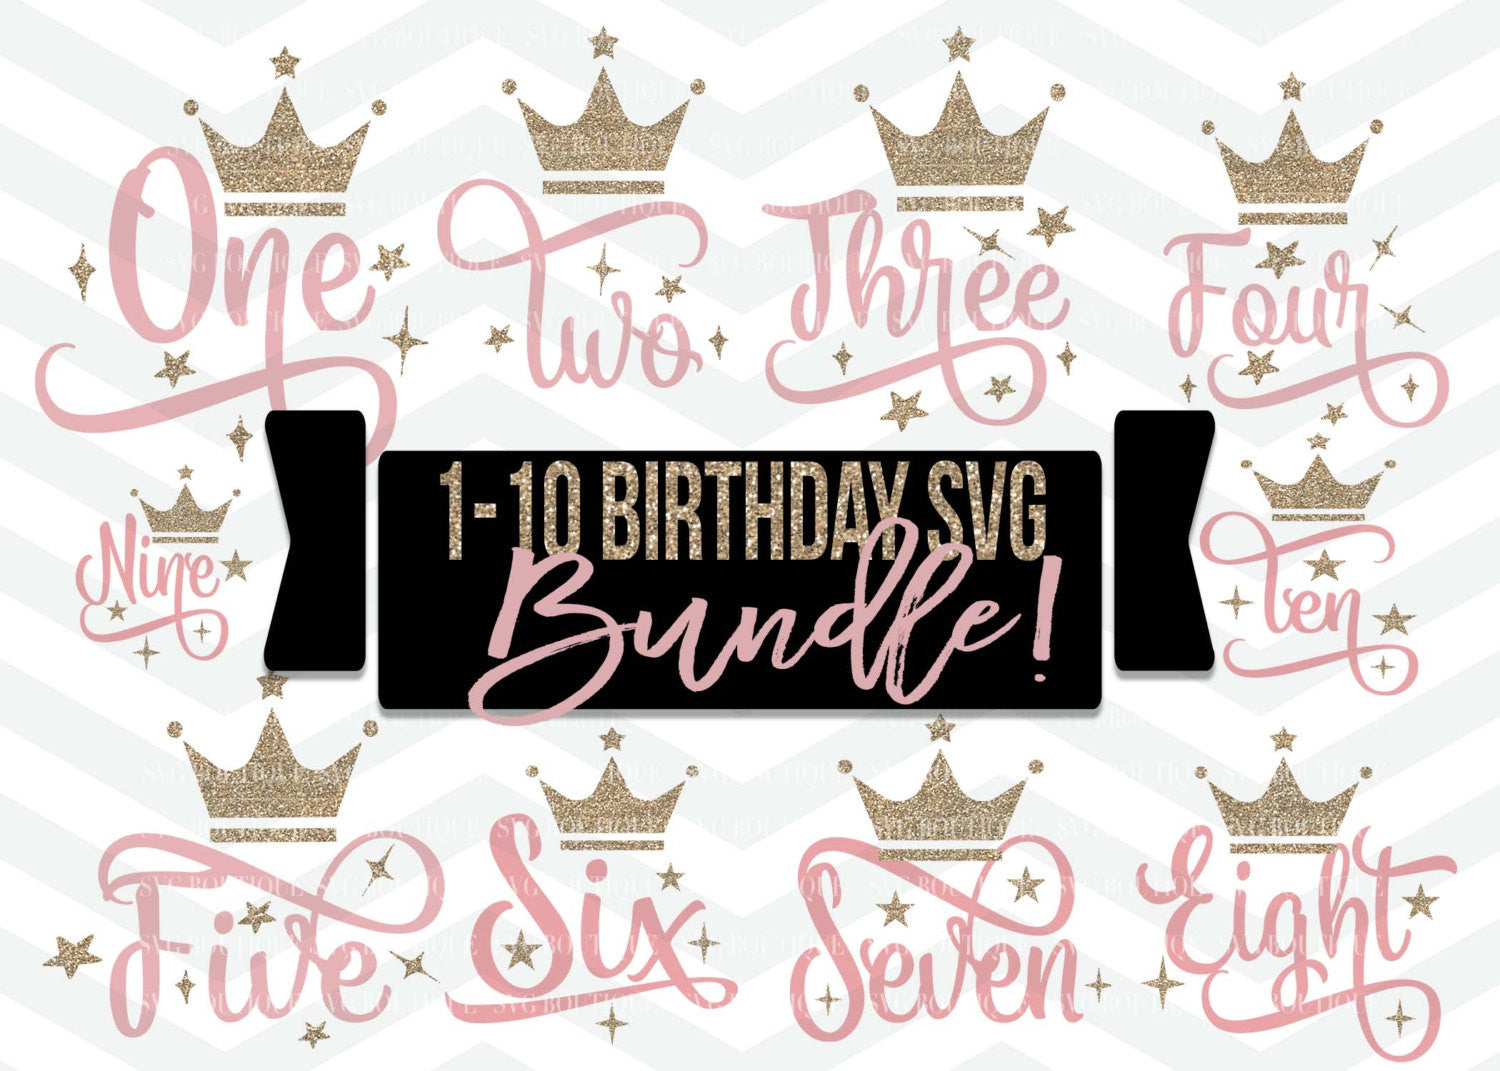 Download Birthday Svg Bundle Baby Bundle Svg Baby Girl Birthday Svg Cut File Crown Number Svg Cutting File Png Cricut Silhouette Svg Boutique